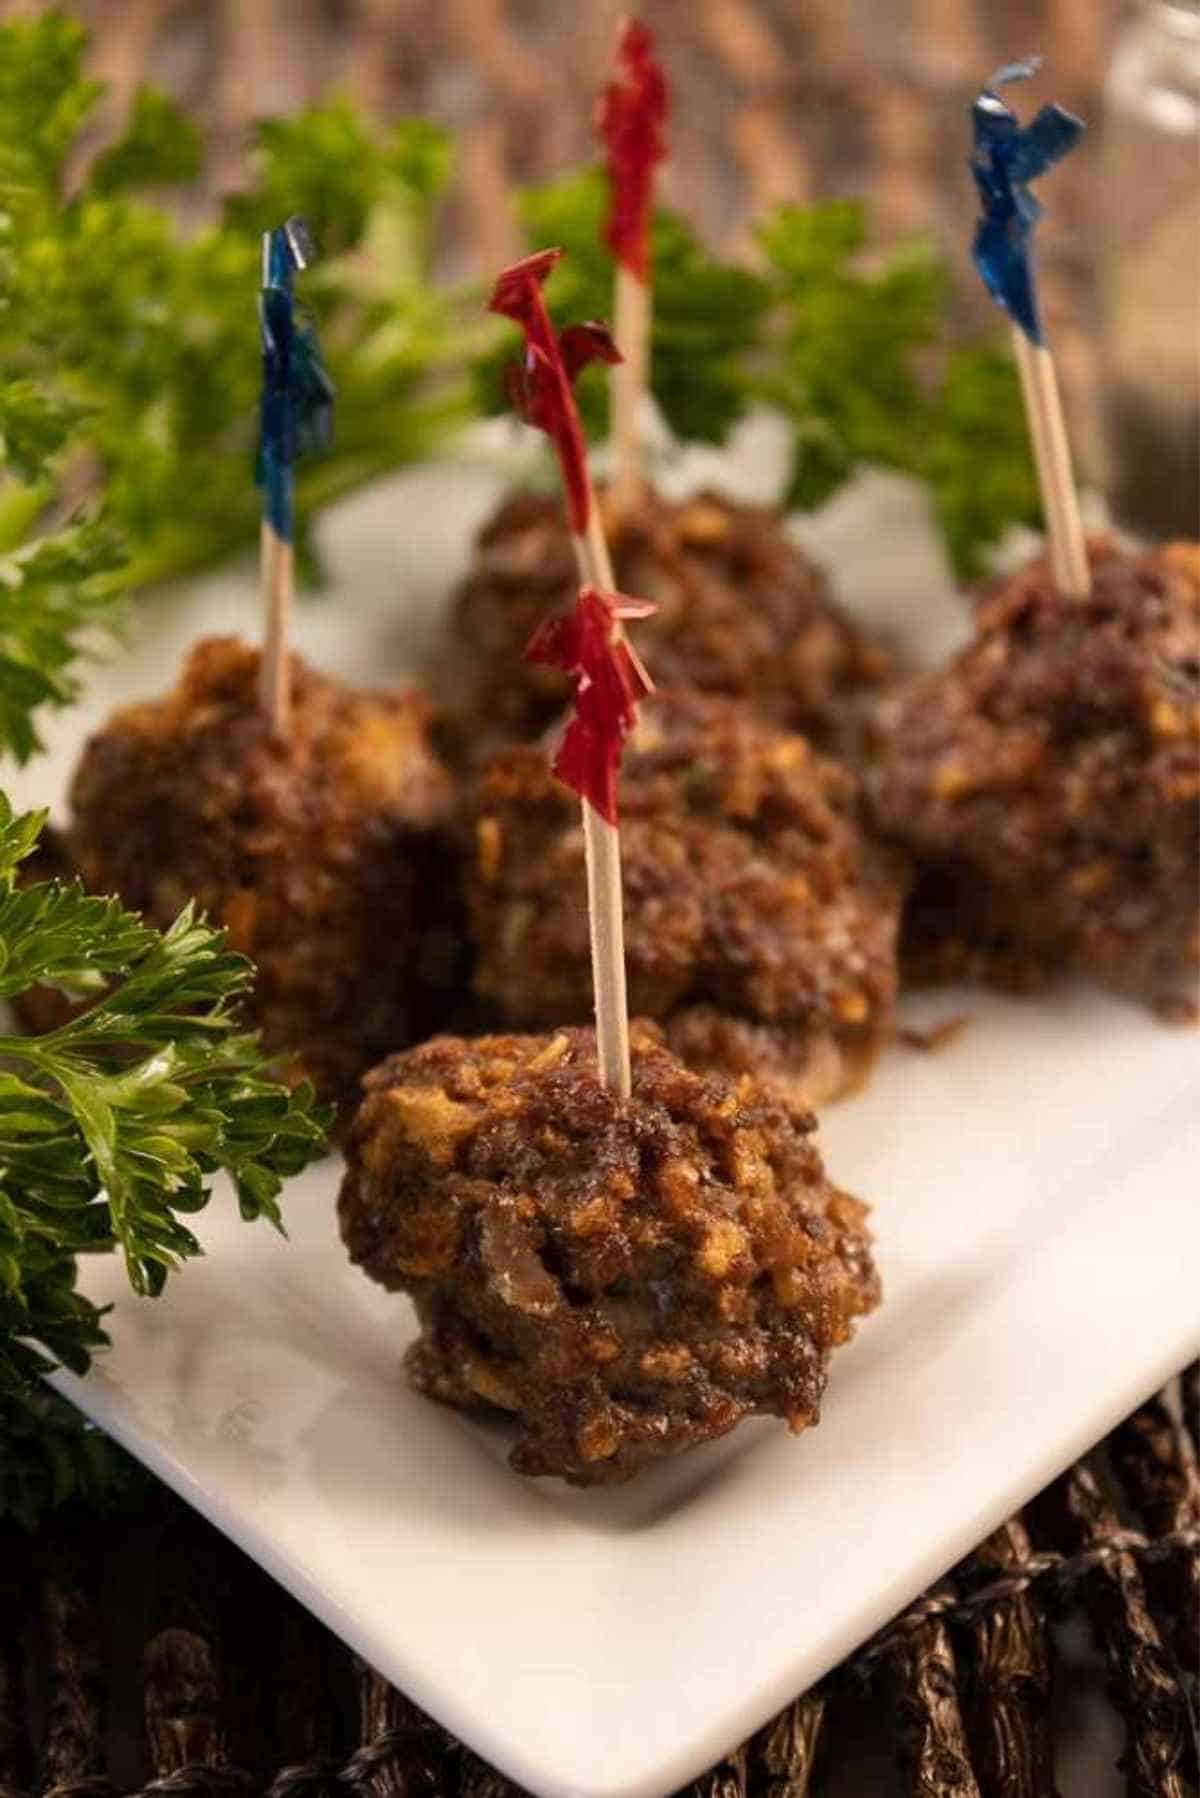 Meatballs with deli picks in the tops.